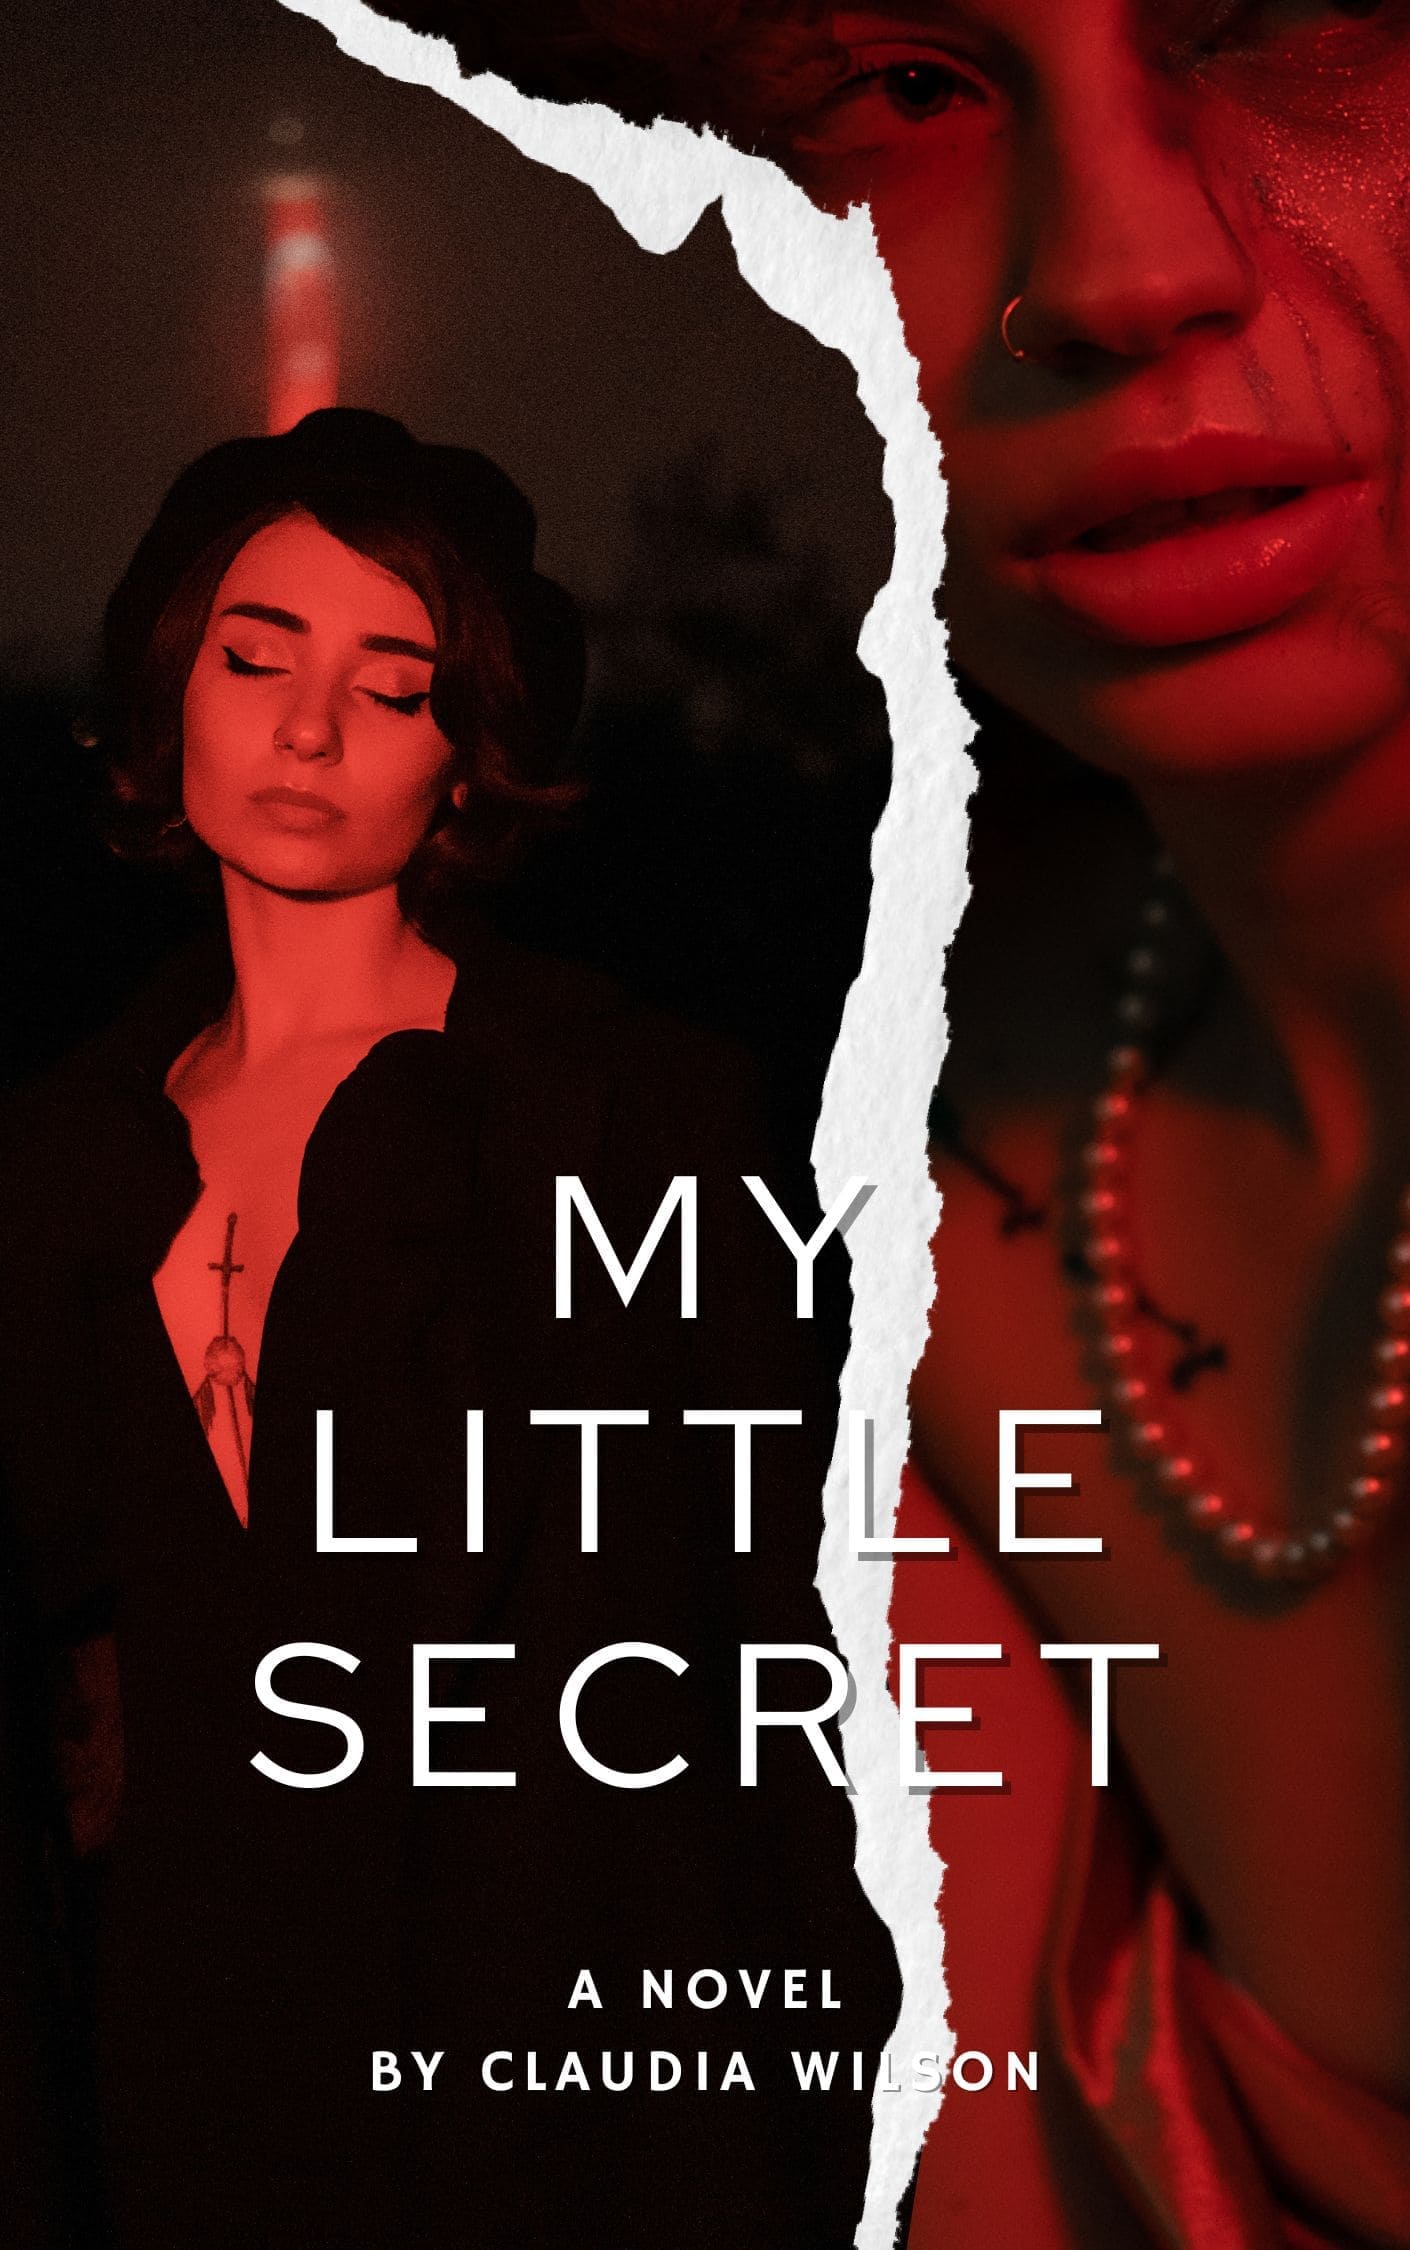 Cover of 'My Little Secret': A book cover featuring a mysterious design with vibrant colors and an intriguing title.